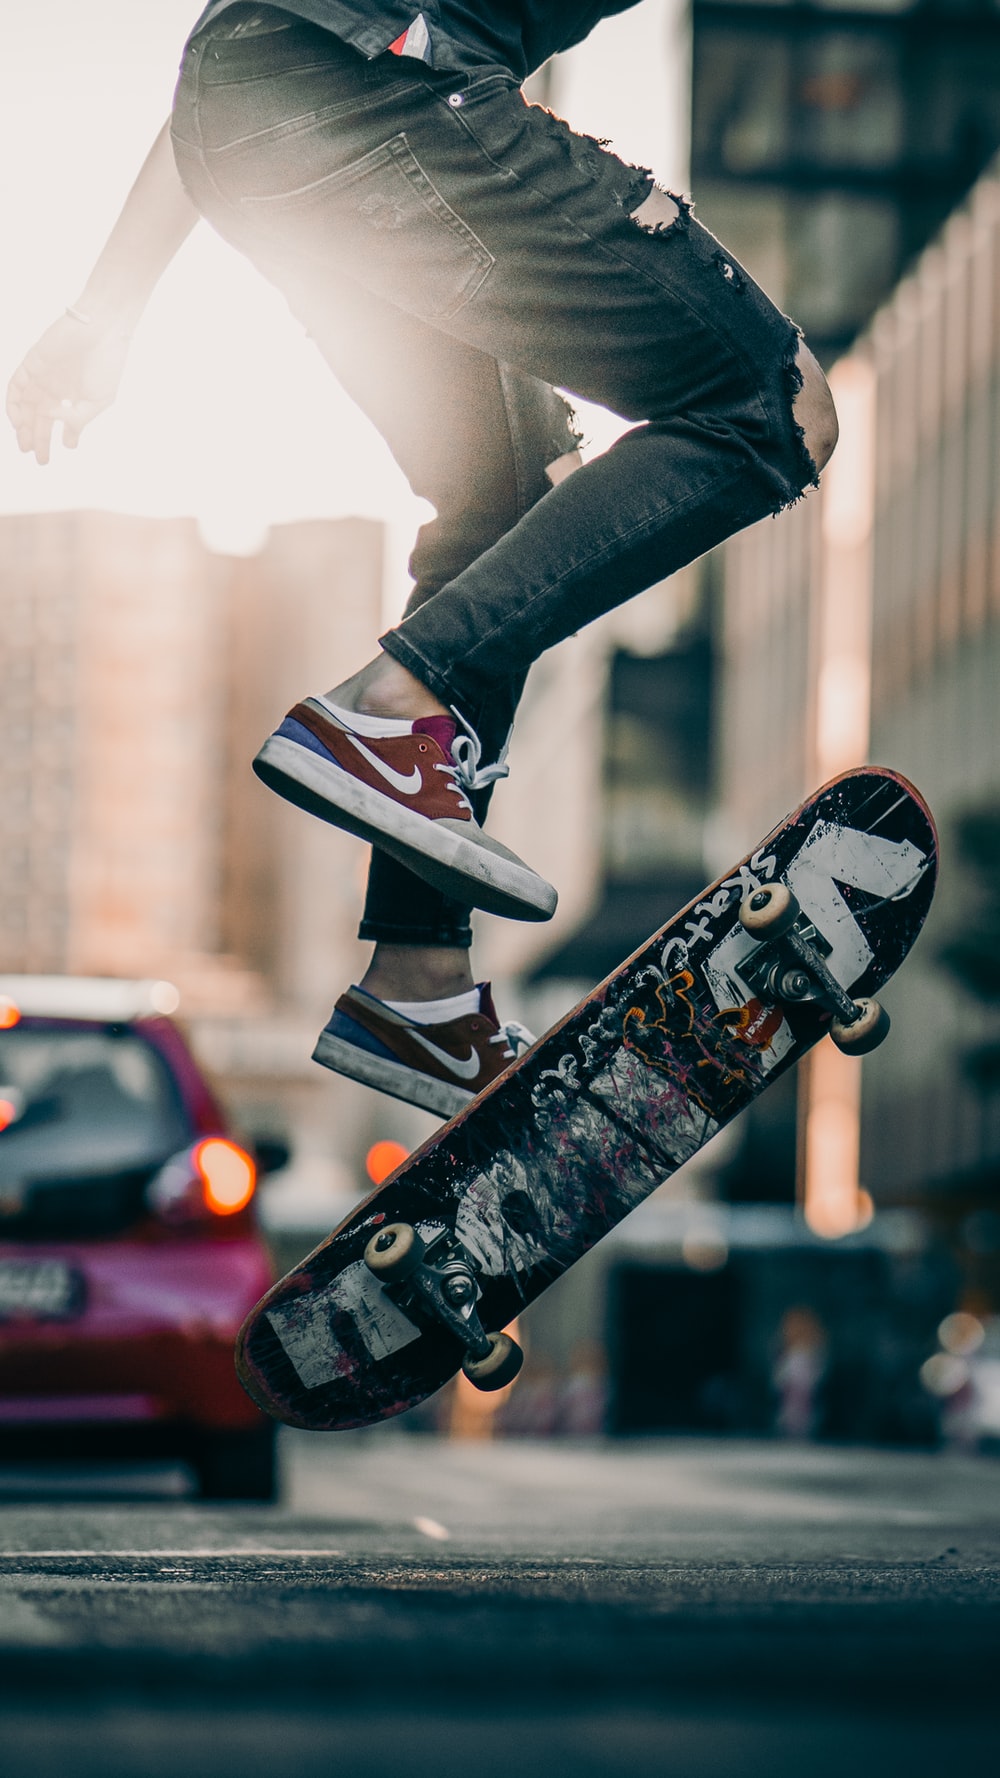 Skateboarding Picture. Download Free Image